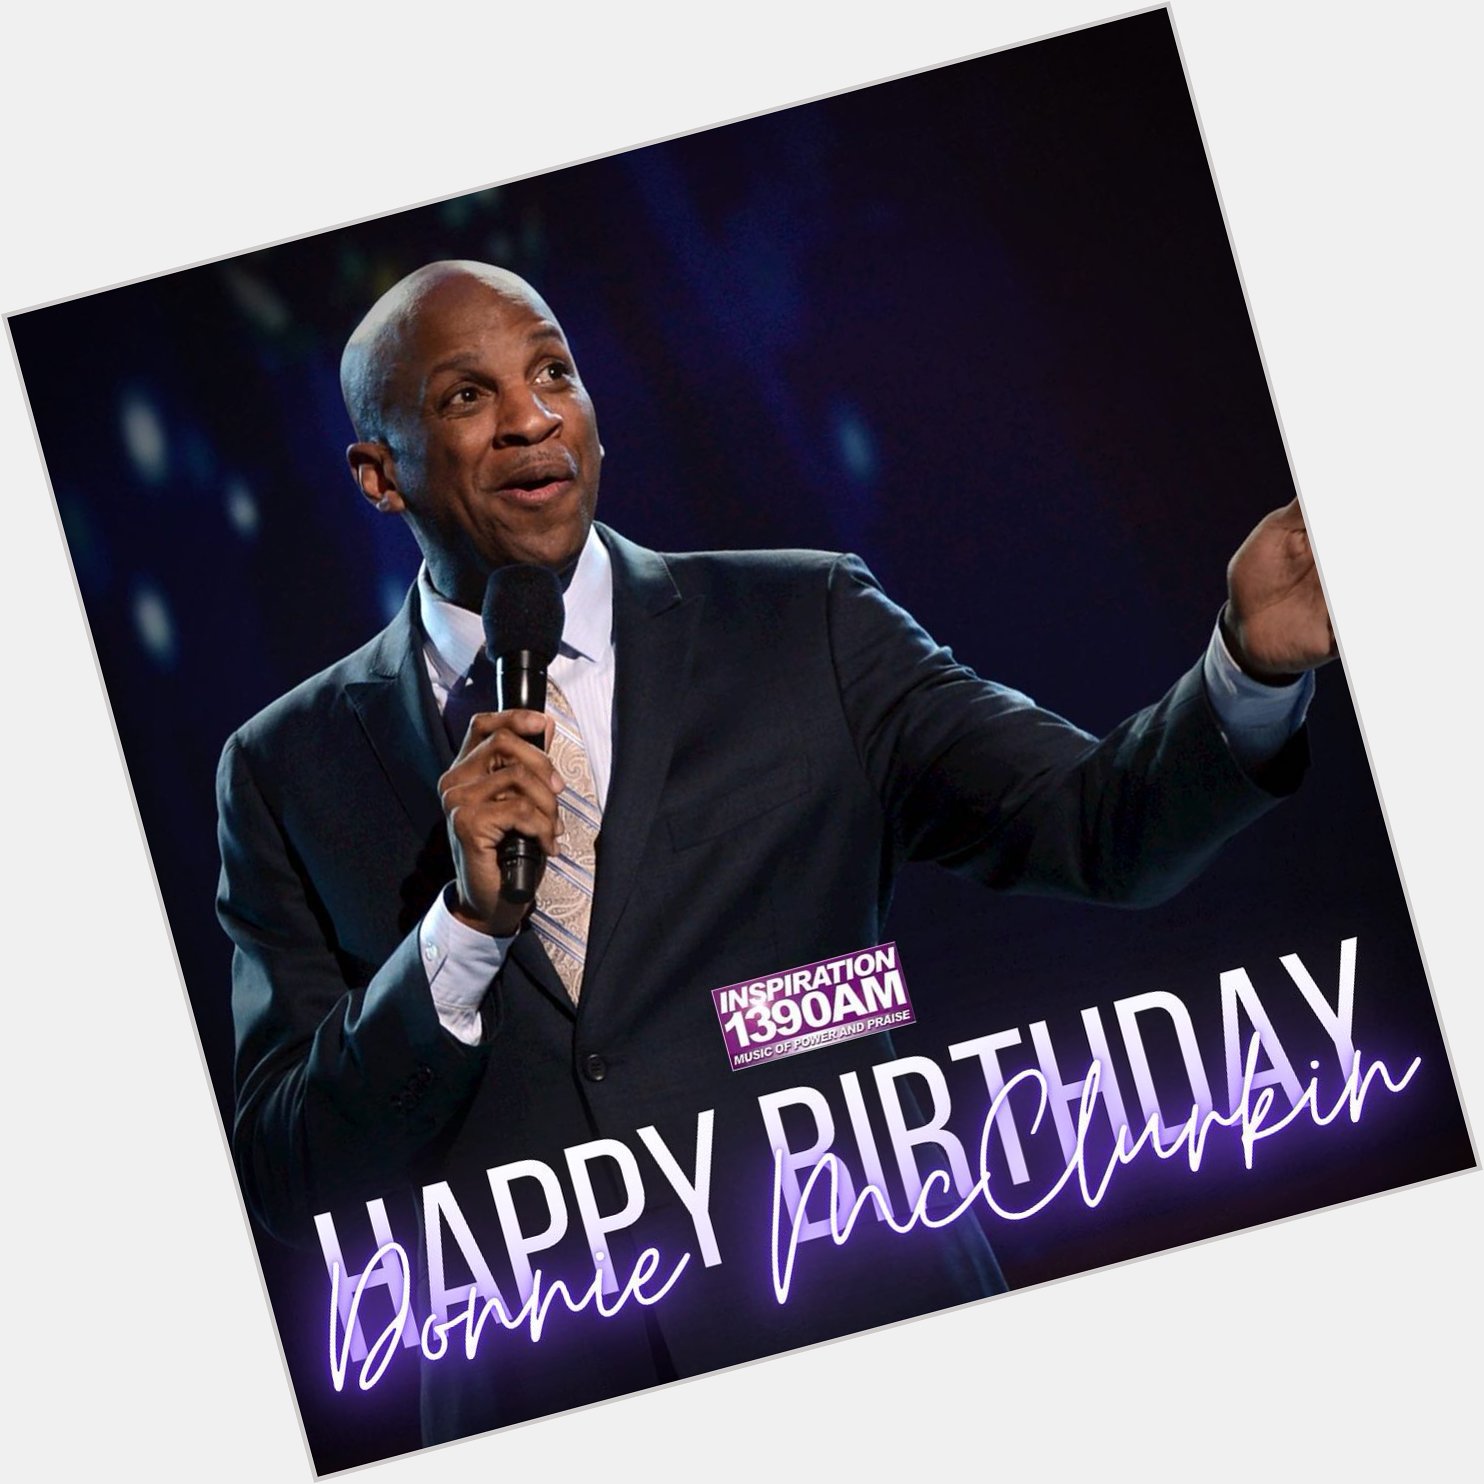 Join us in wishing the incredible Donnie McClurkin a very special happy birthday!  